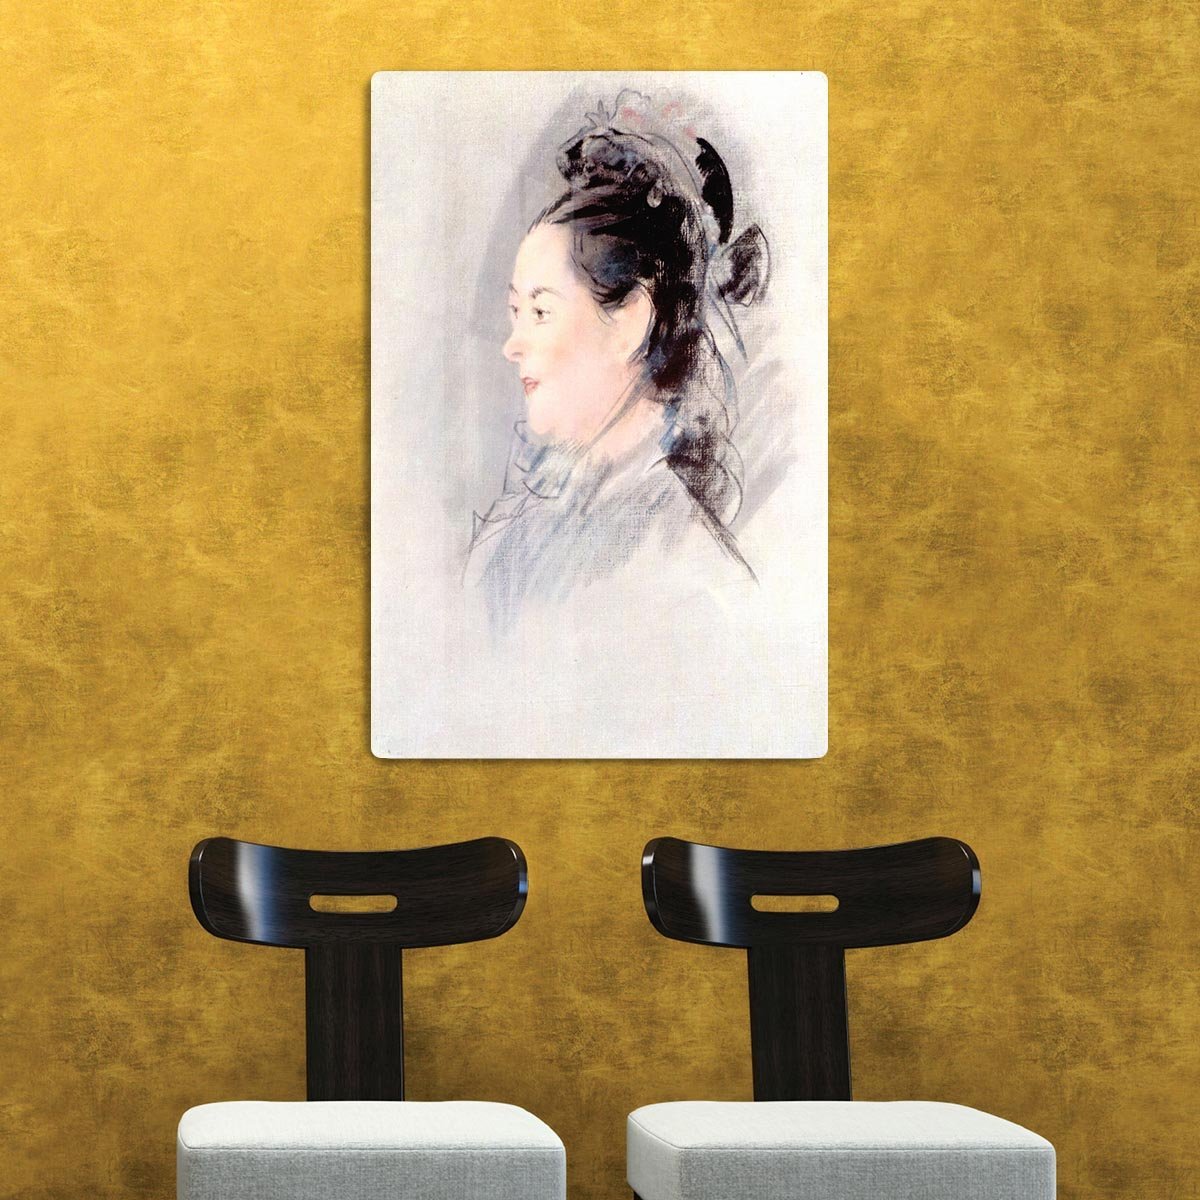 Lady with Hair Up by manet HD Metal Print